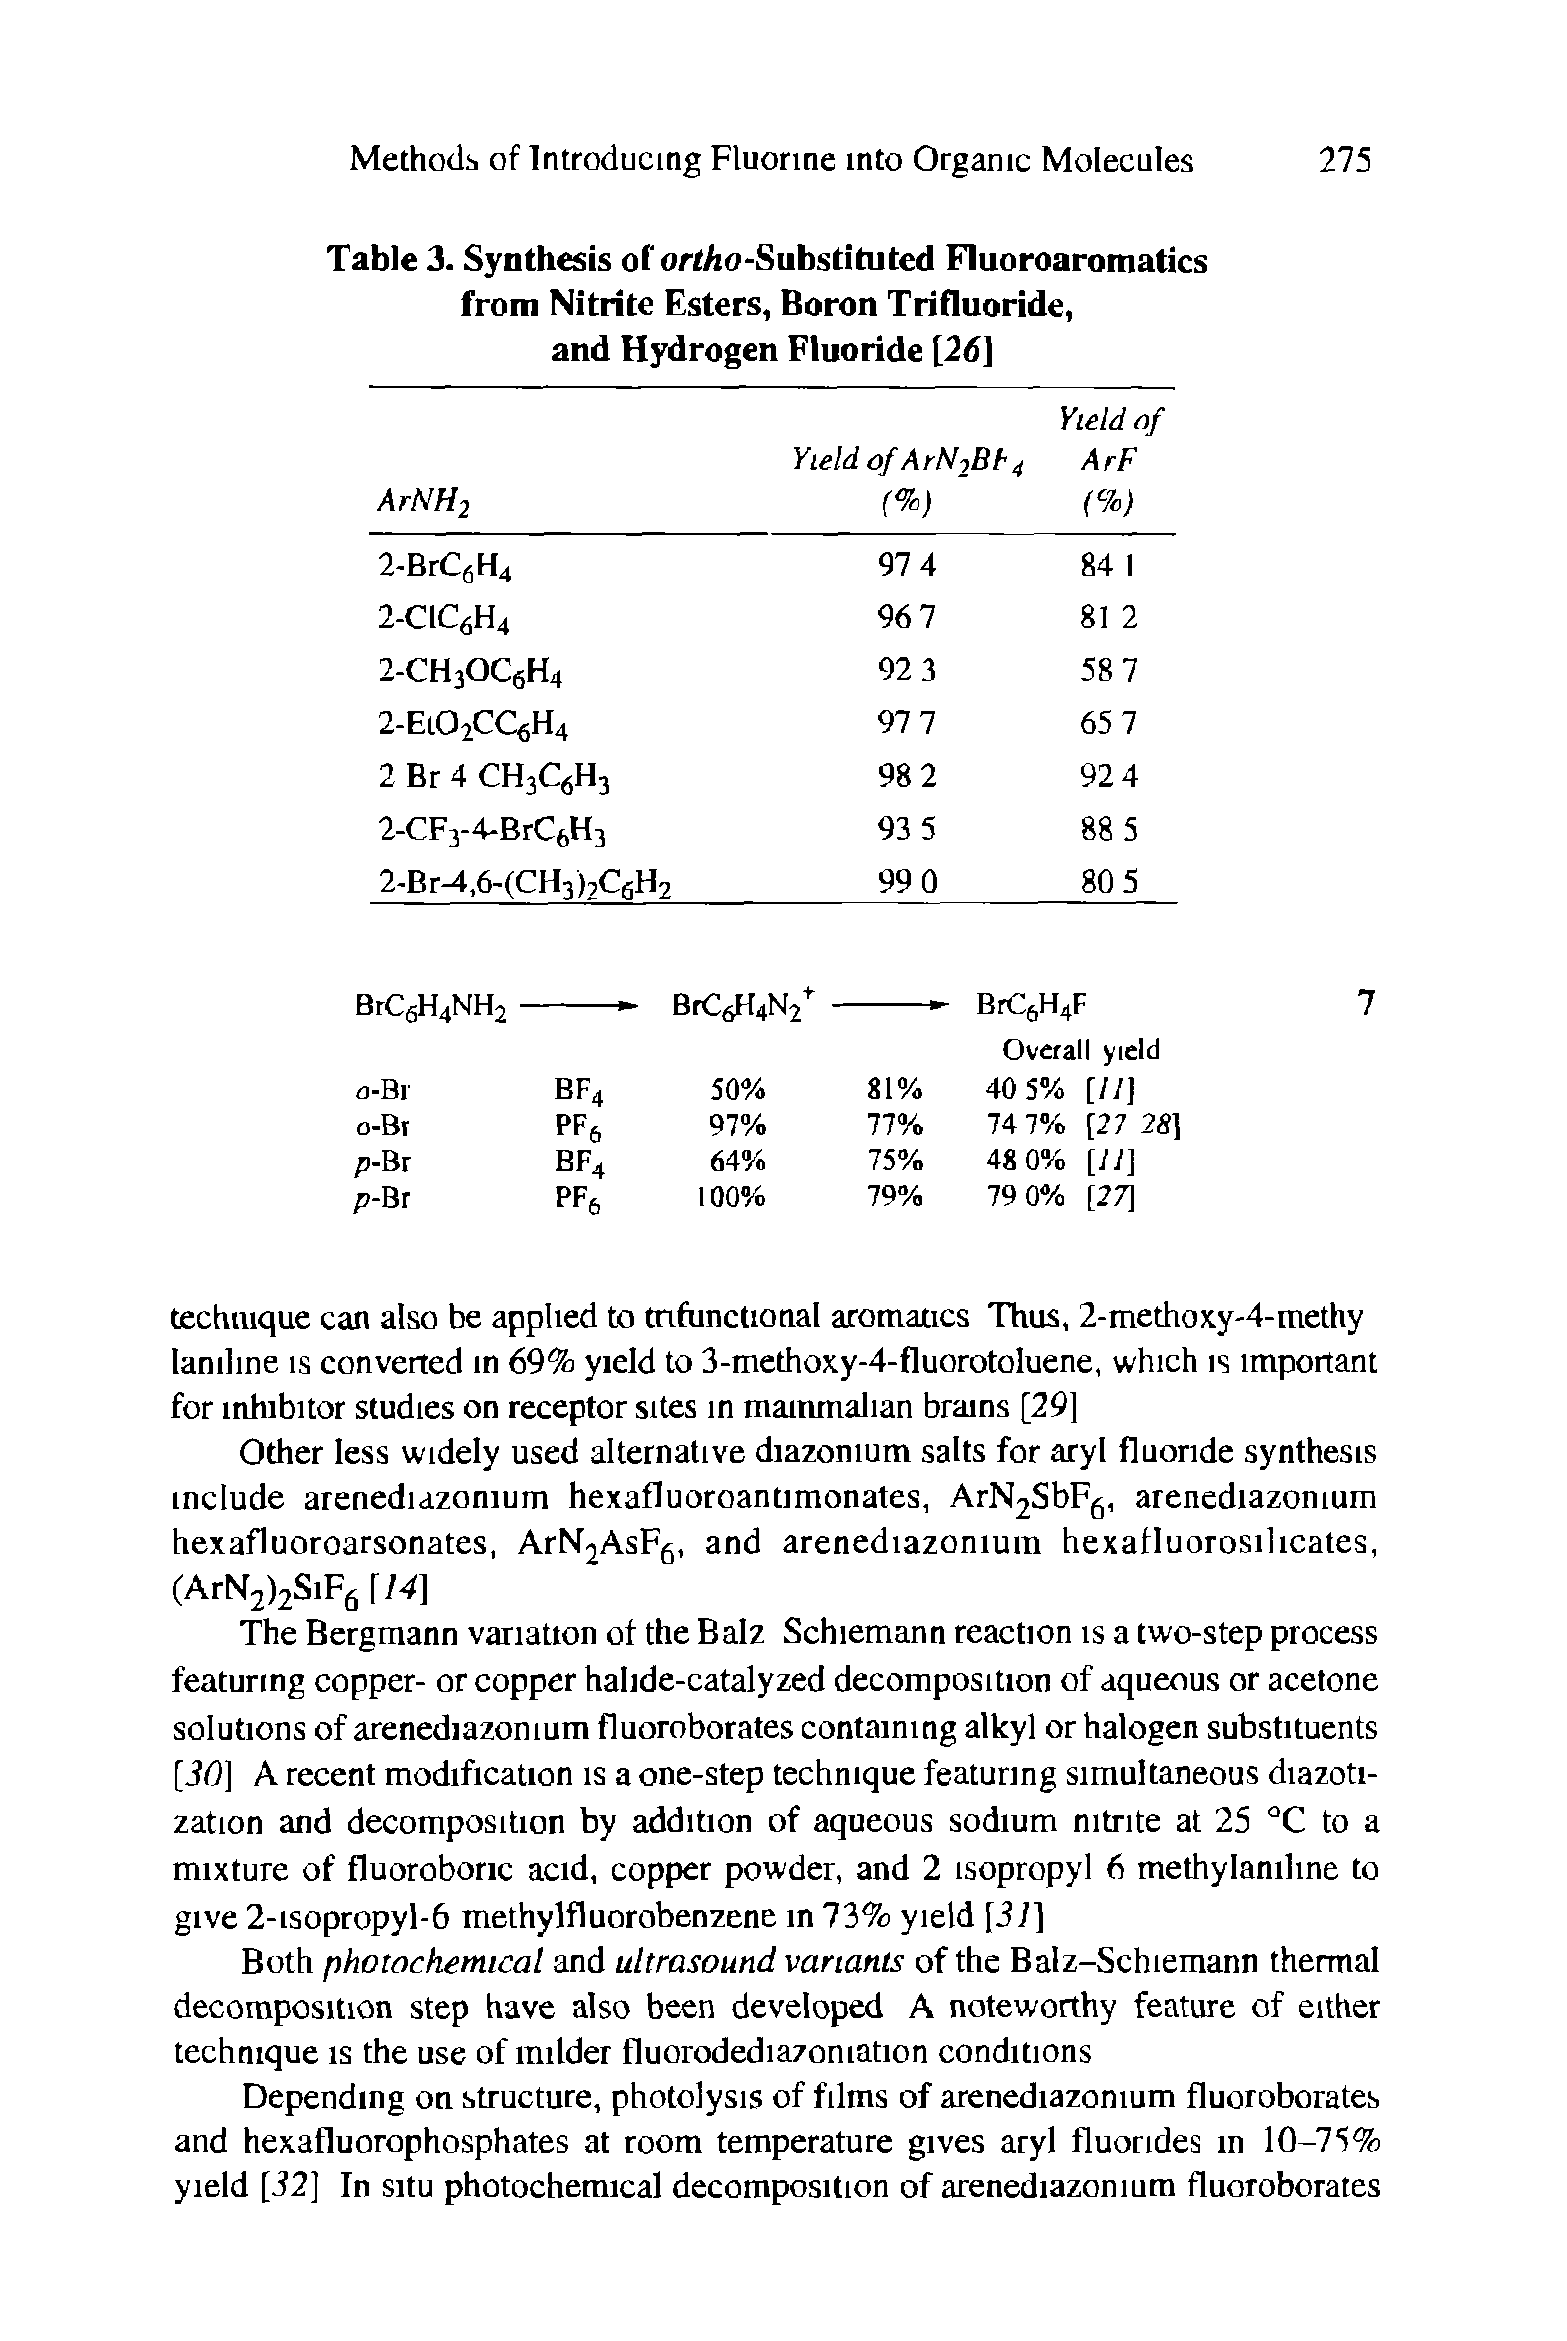 Table 3. Synthesis of ort/io-Substituted Fluoroaromatics from Nitrite Esters, Boron Trifluoride, and Hydrogen Fluoride [26]...